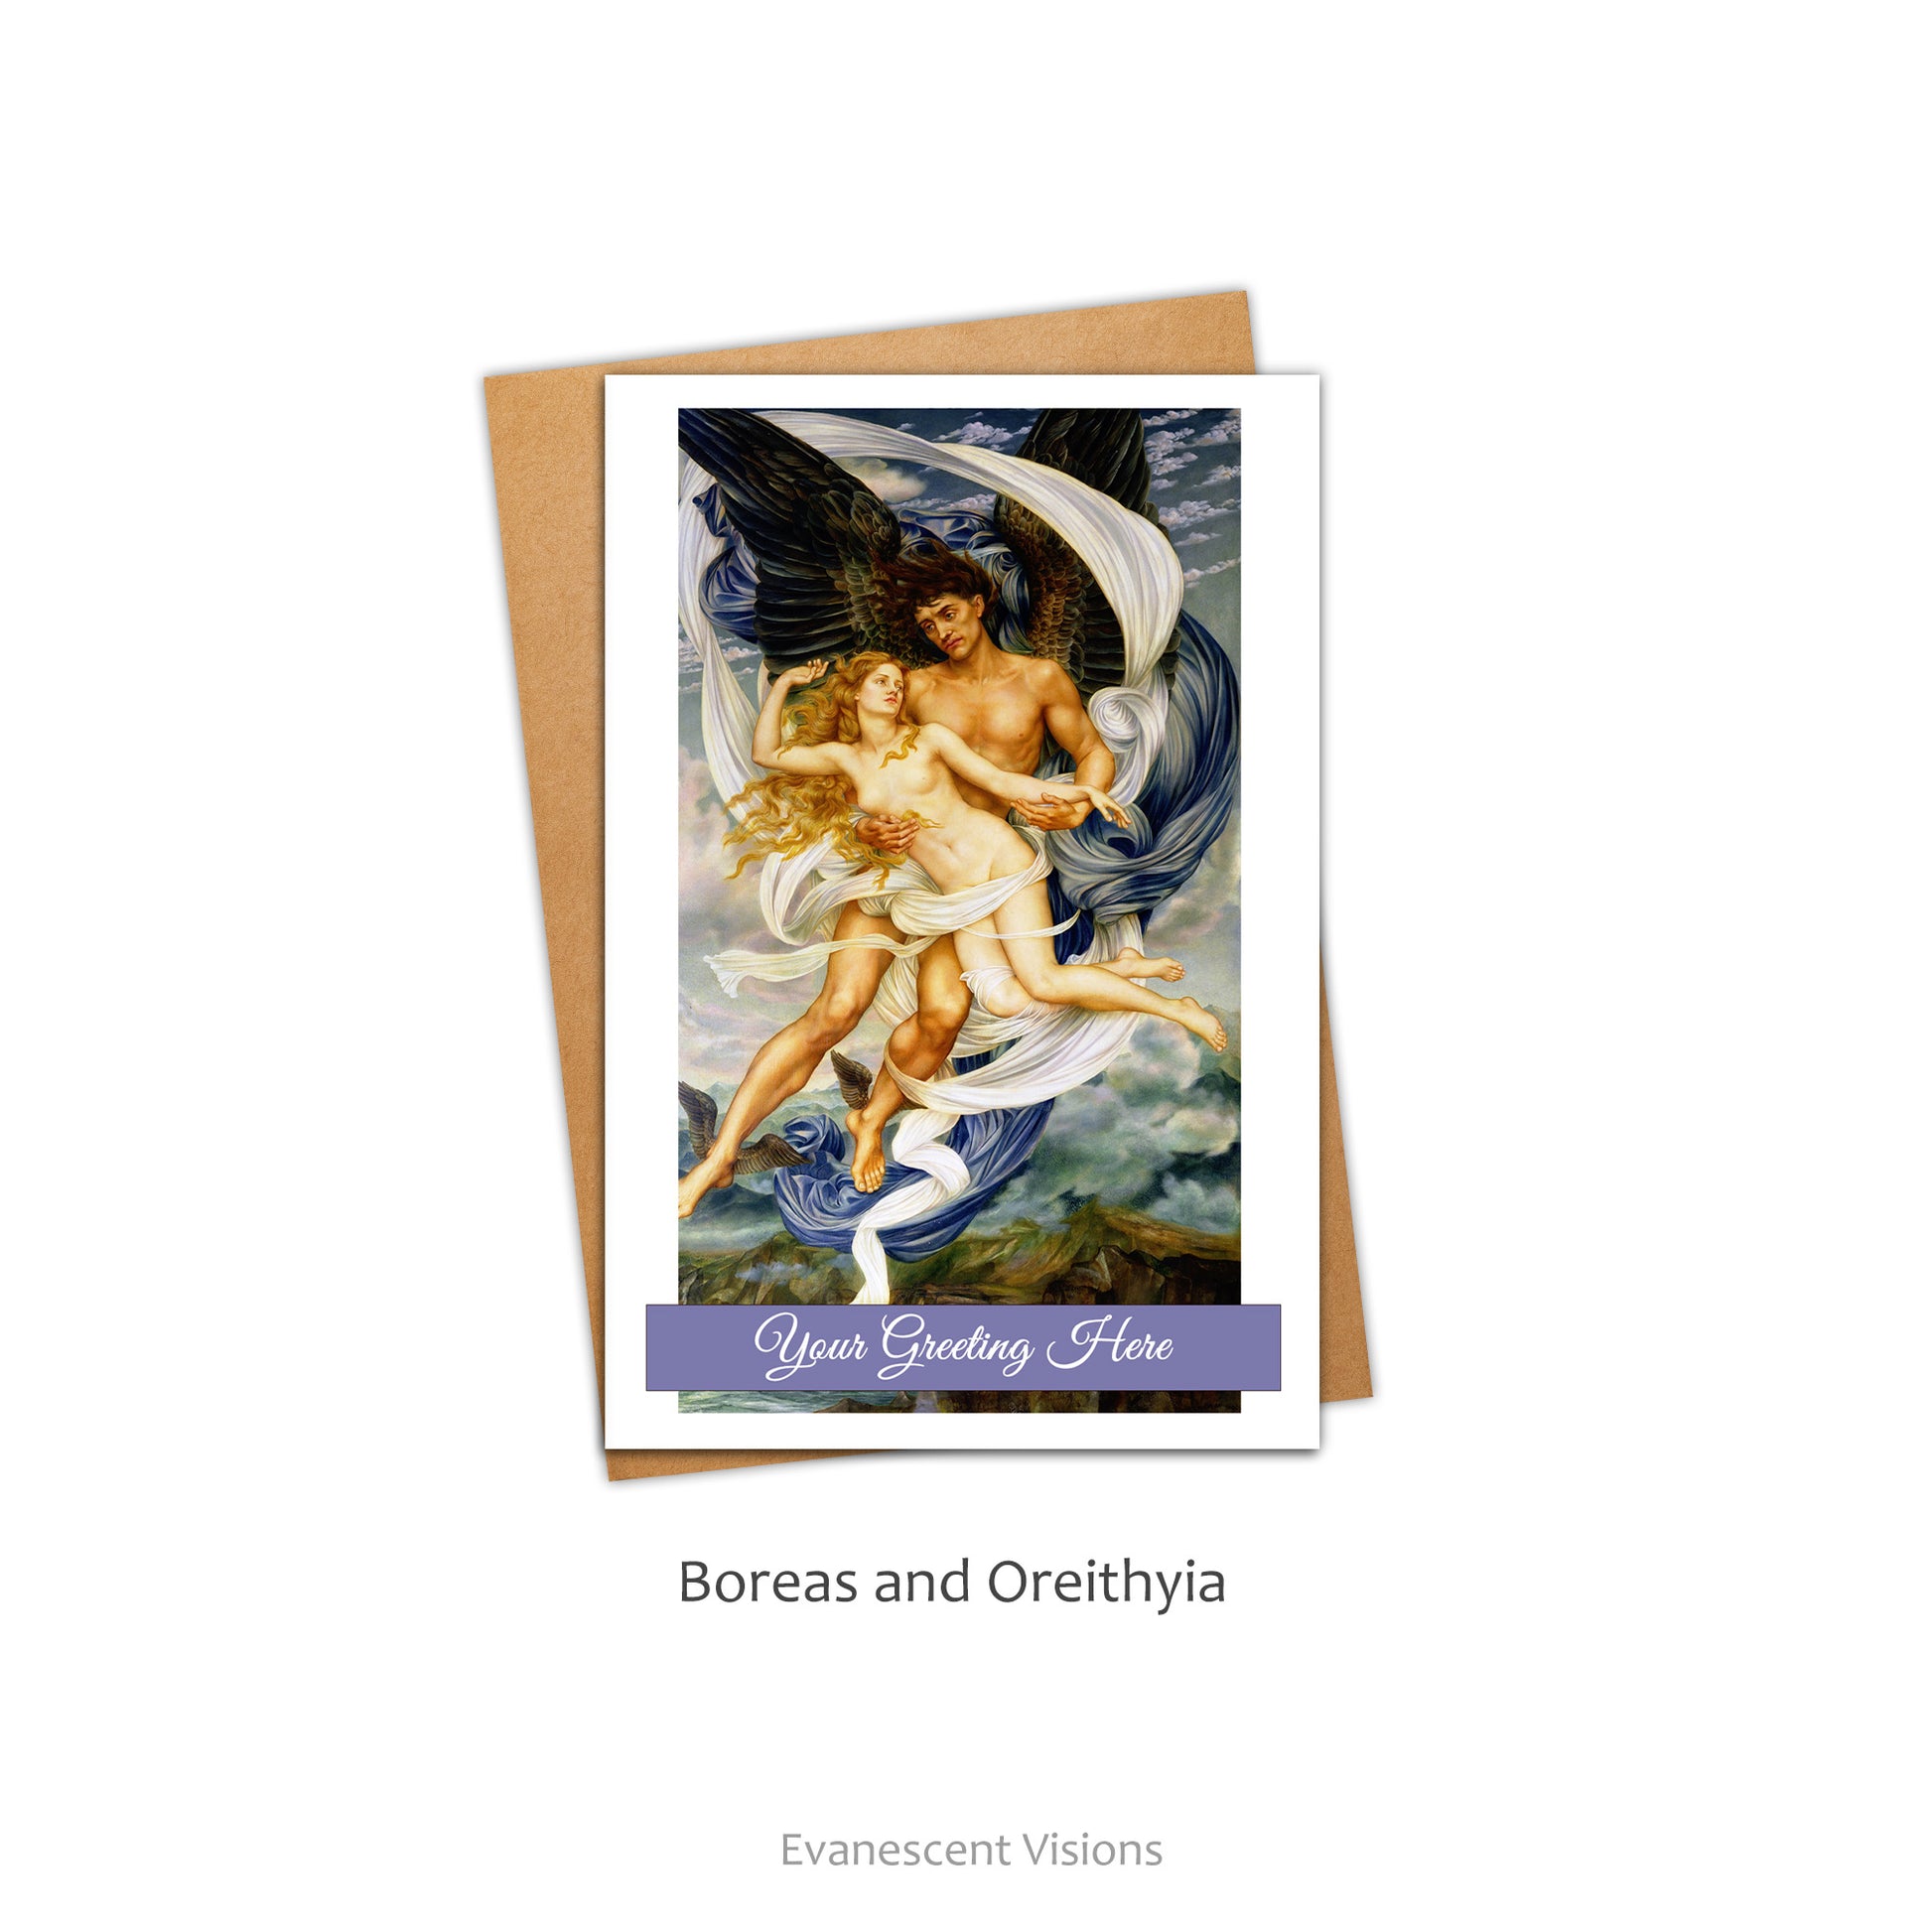 Card and envelope with personalised front greeting. The card shows the image of the painting  'Boreas and Oreithyia' by Evelyn De Morgan.